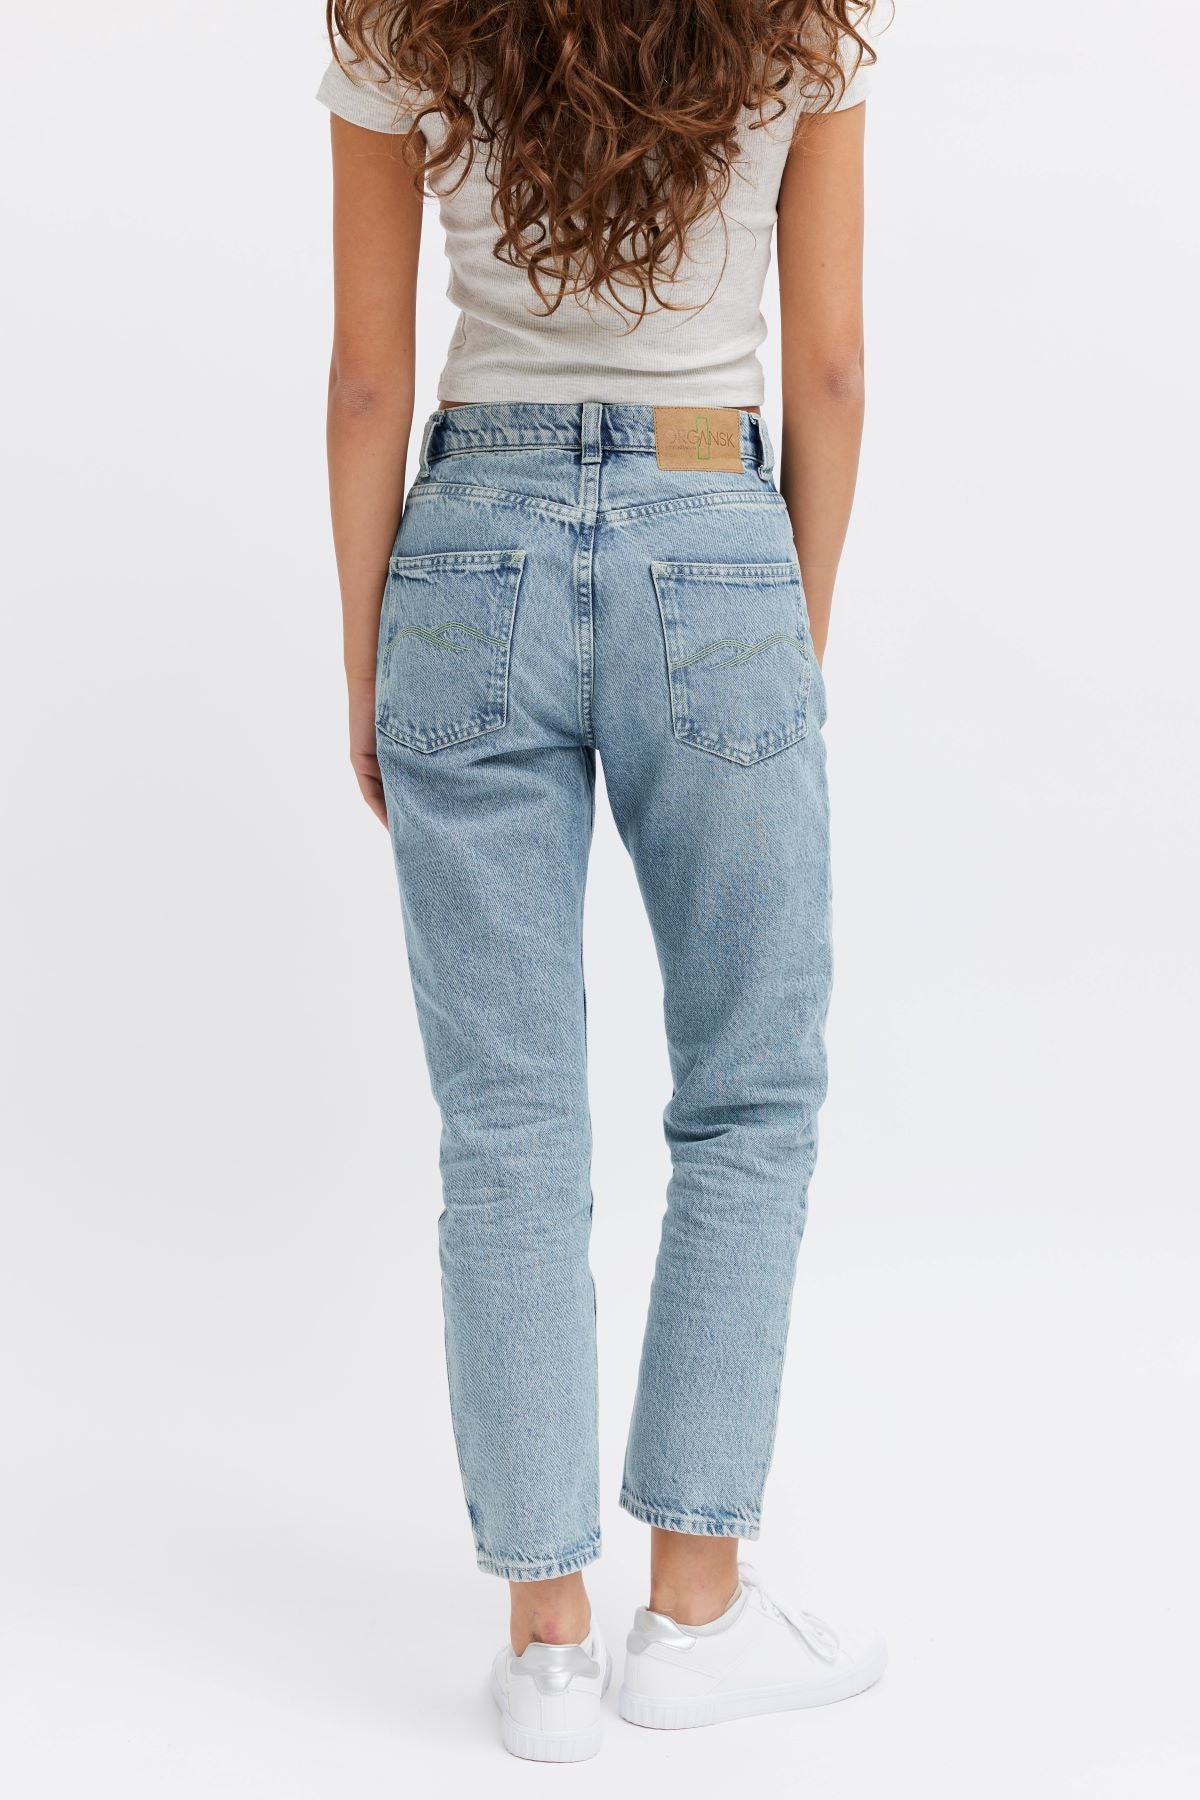 Women's best ethically made jeans - 100% Organic Cotton - GOTS Certified